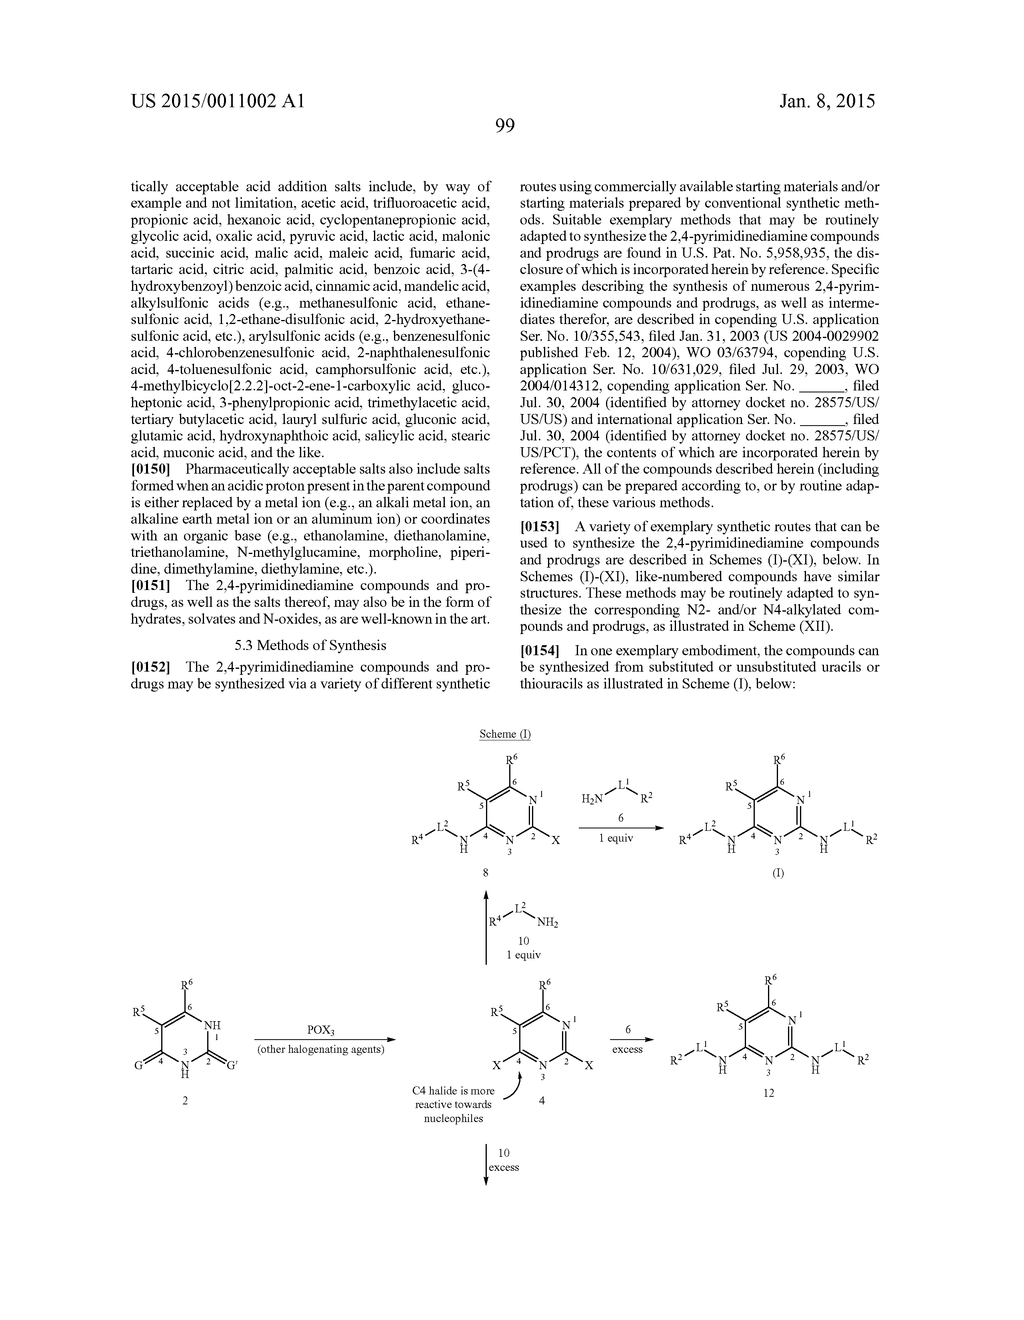 2,4-Pyrimidinediamine Compounds And Uses As Anti-Proliferative Agents - diagram, schematic, and image 100